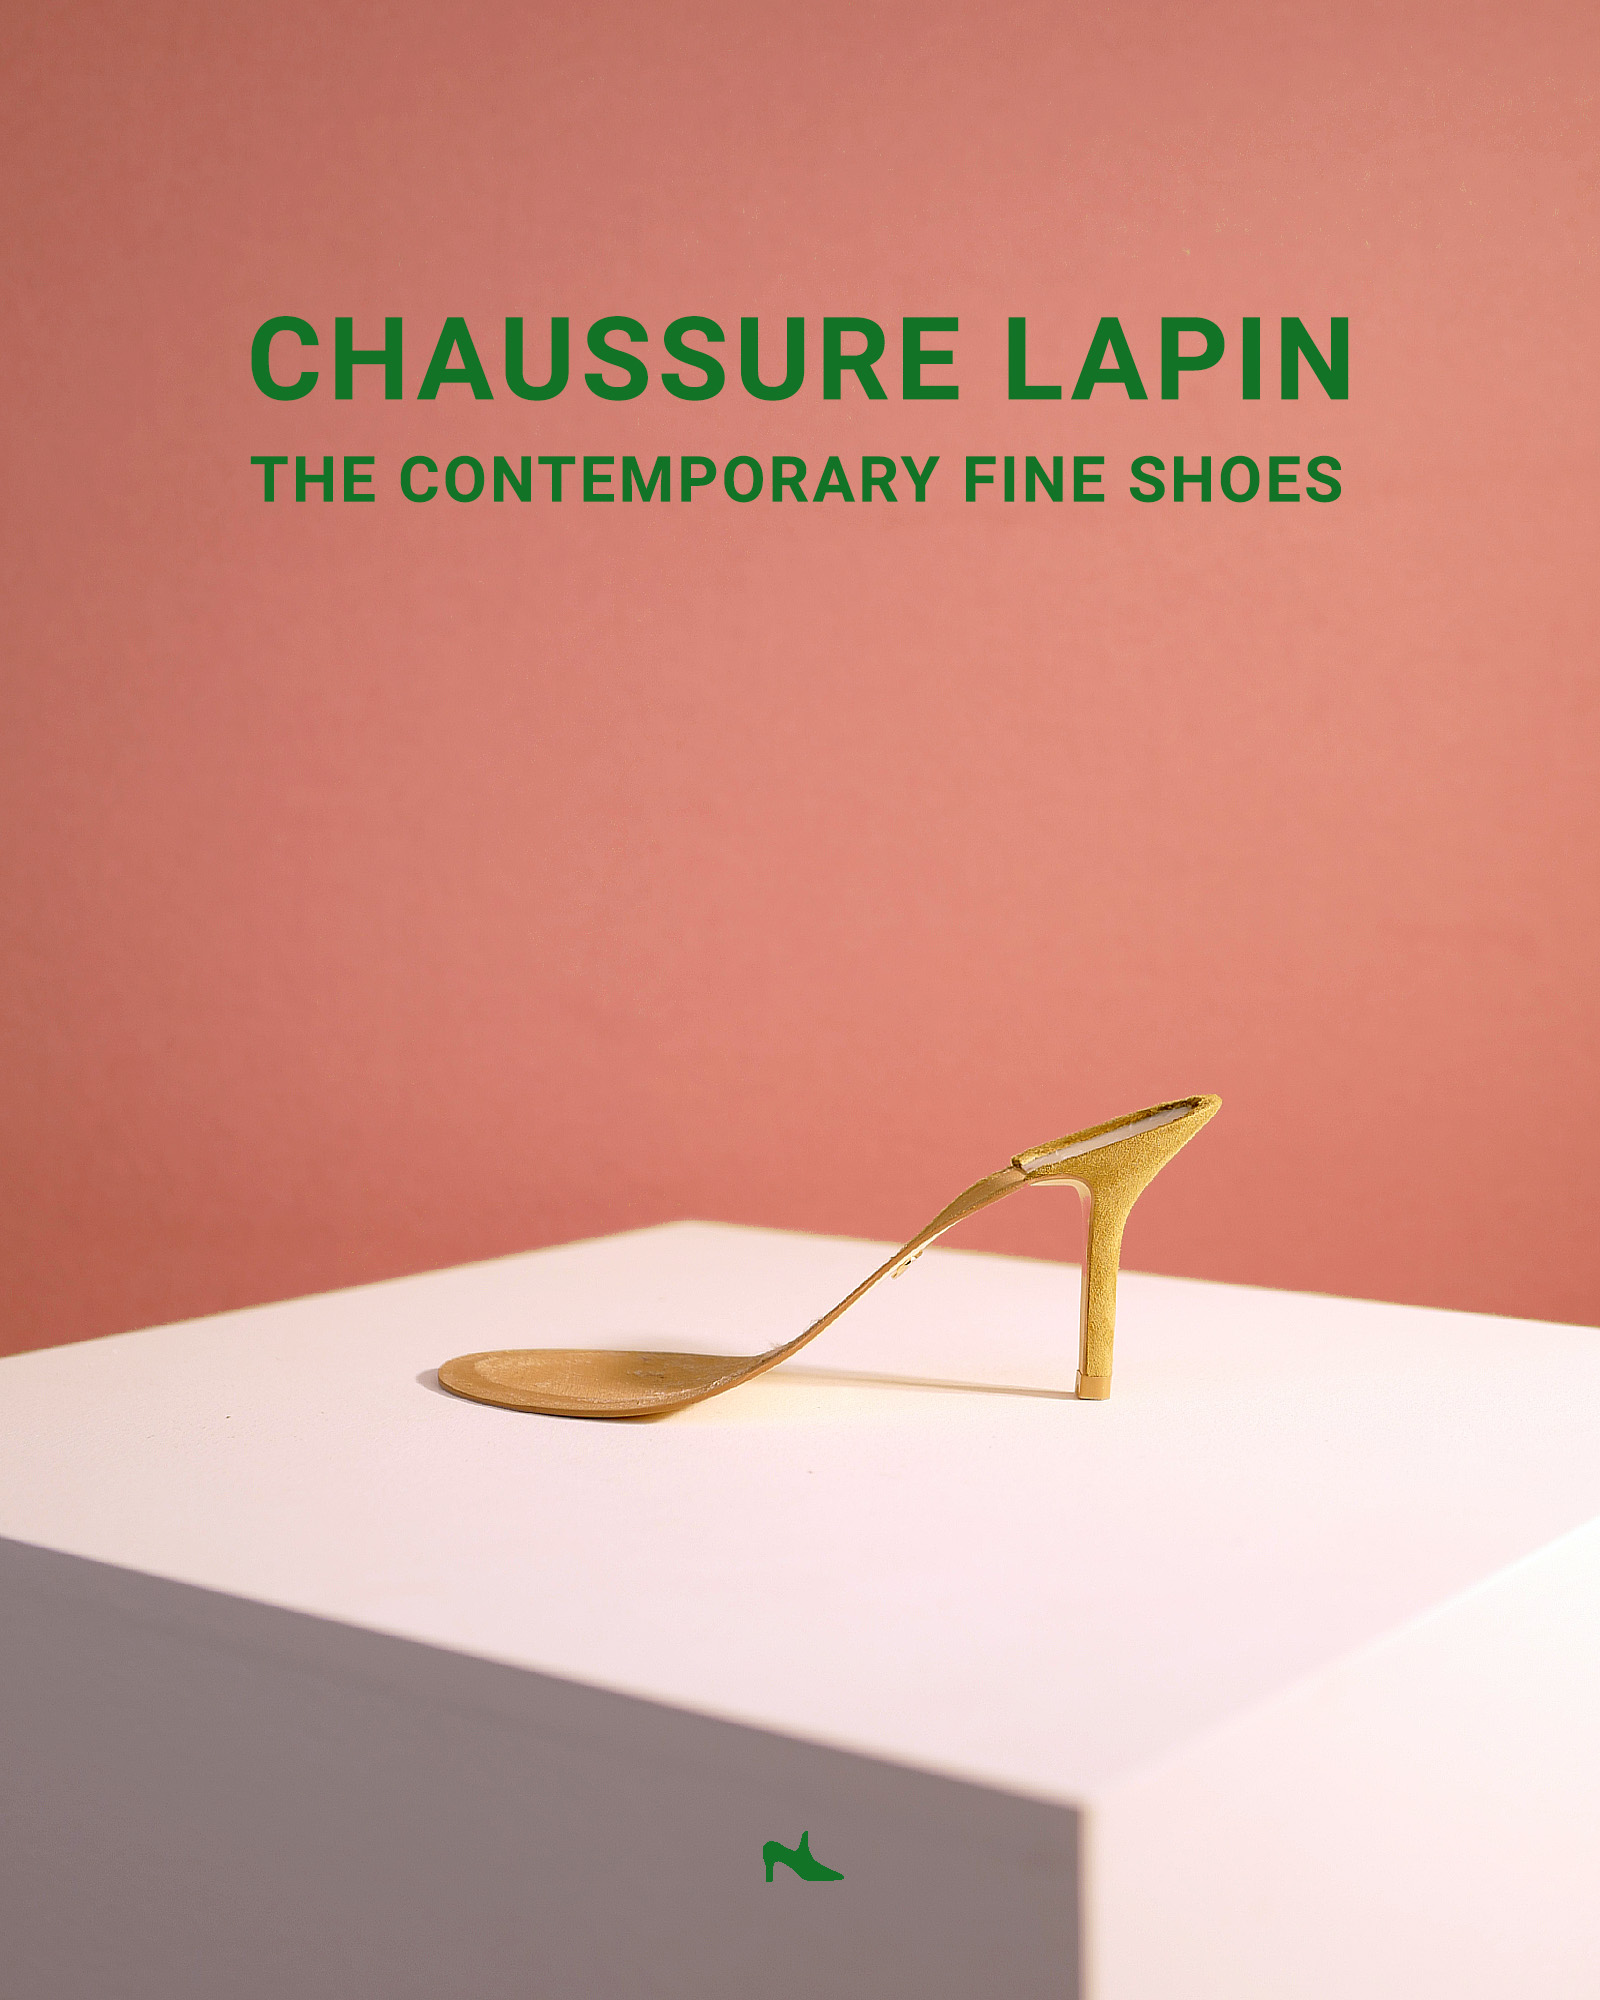 The Contemporary Fine Shoes